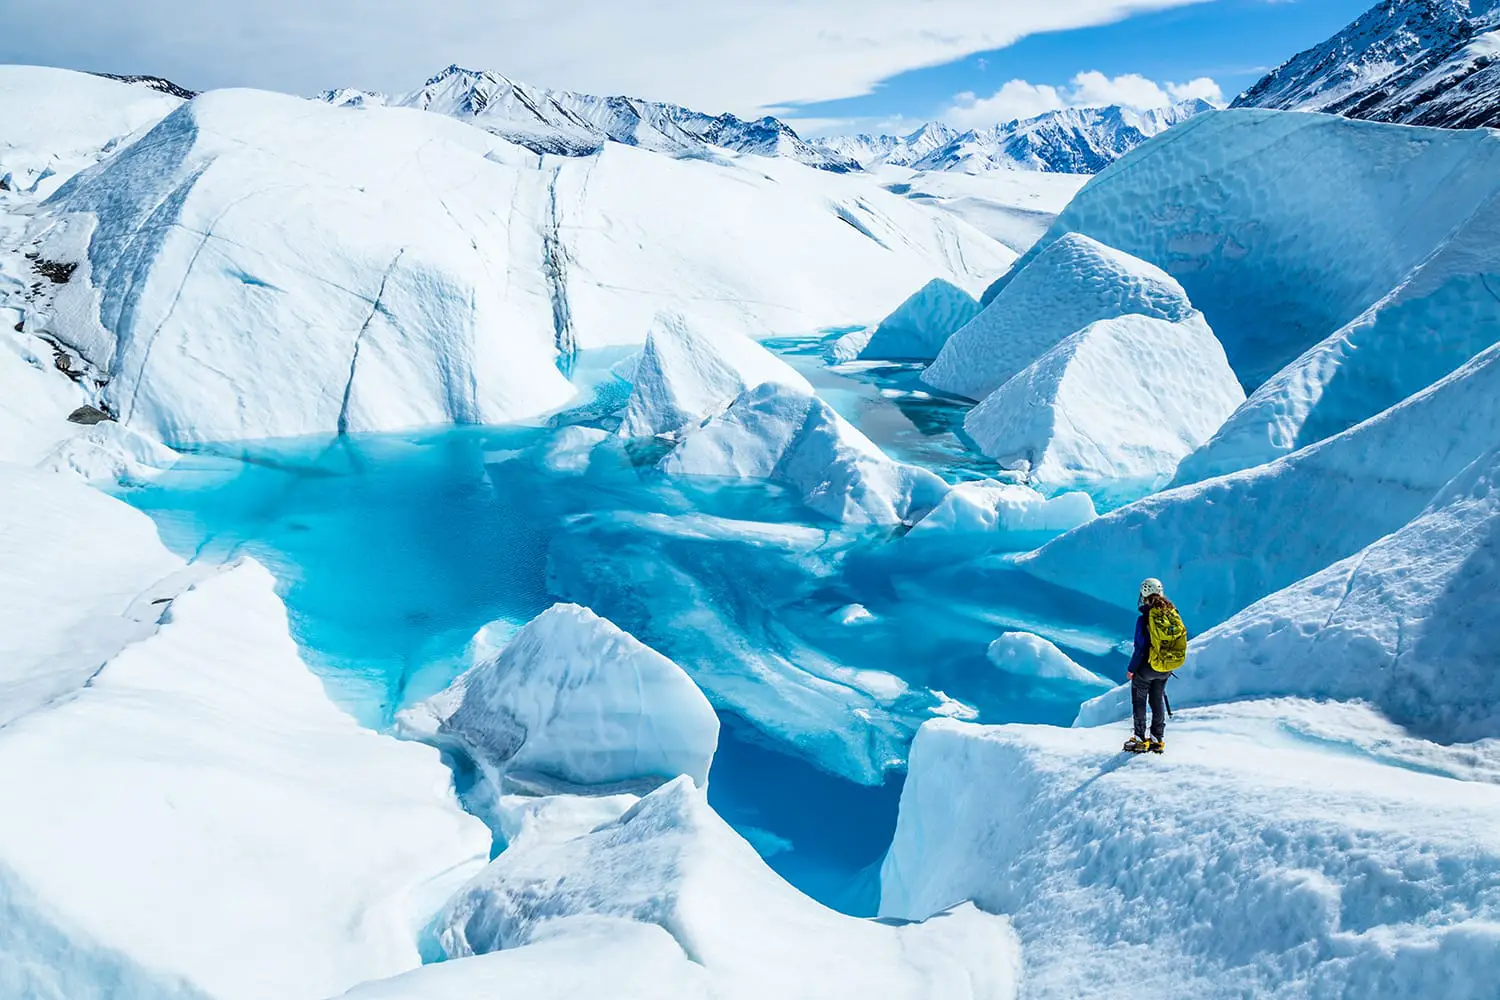 Standing near the edge of large blue pool on top of the Matanuska Glacier. A young woman holding an ice axe with a backpack and helmet looks out over the lake.